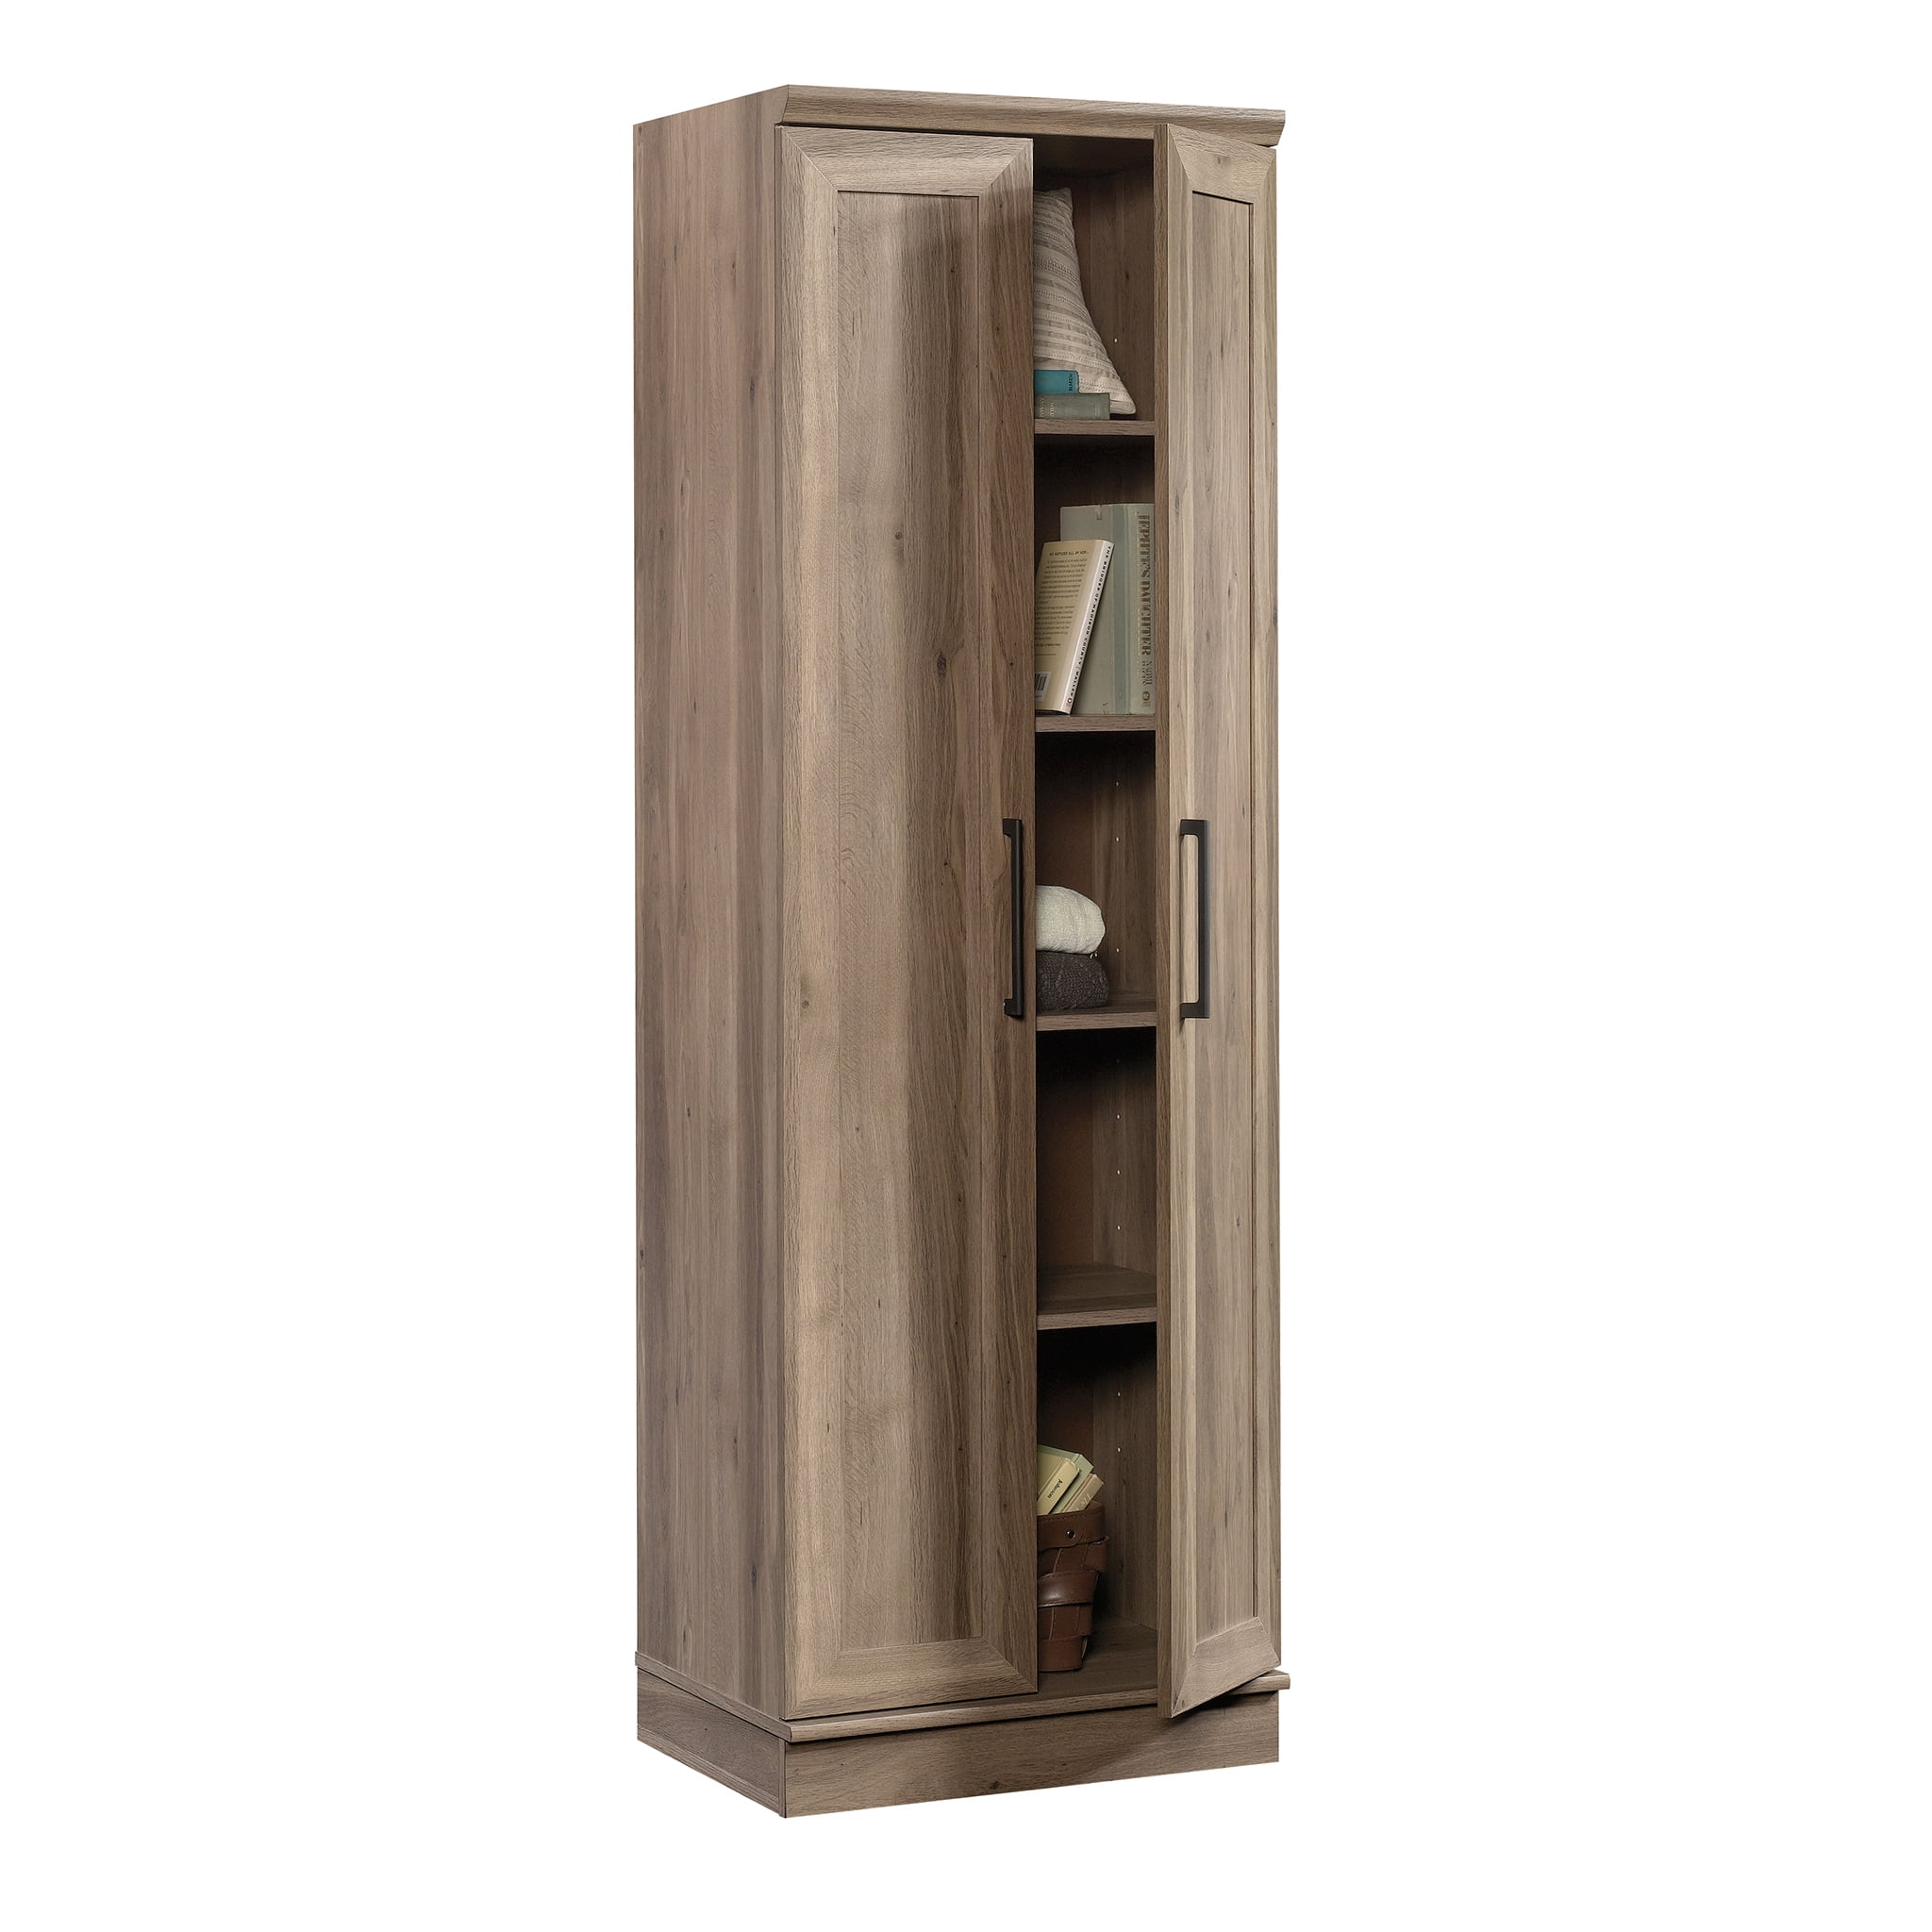 Details about   Tall Shelving Storage Organizer Cabinet Panel Door Cinnamon Cherry Finish NEW 